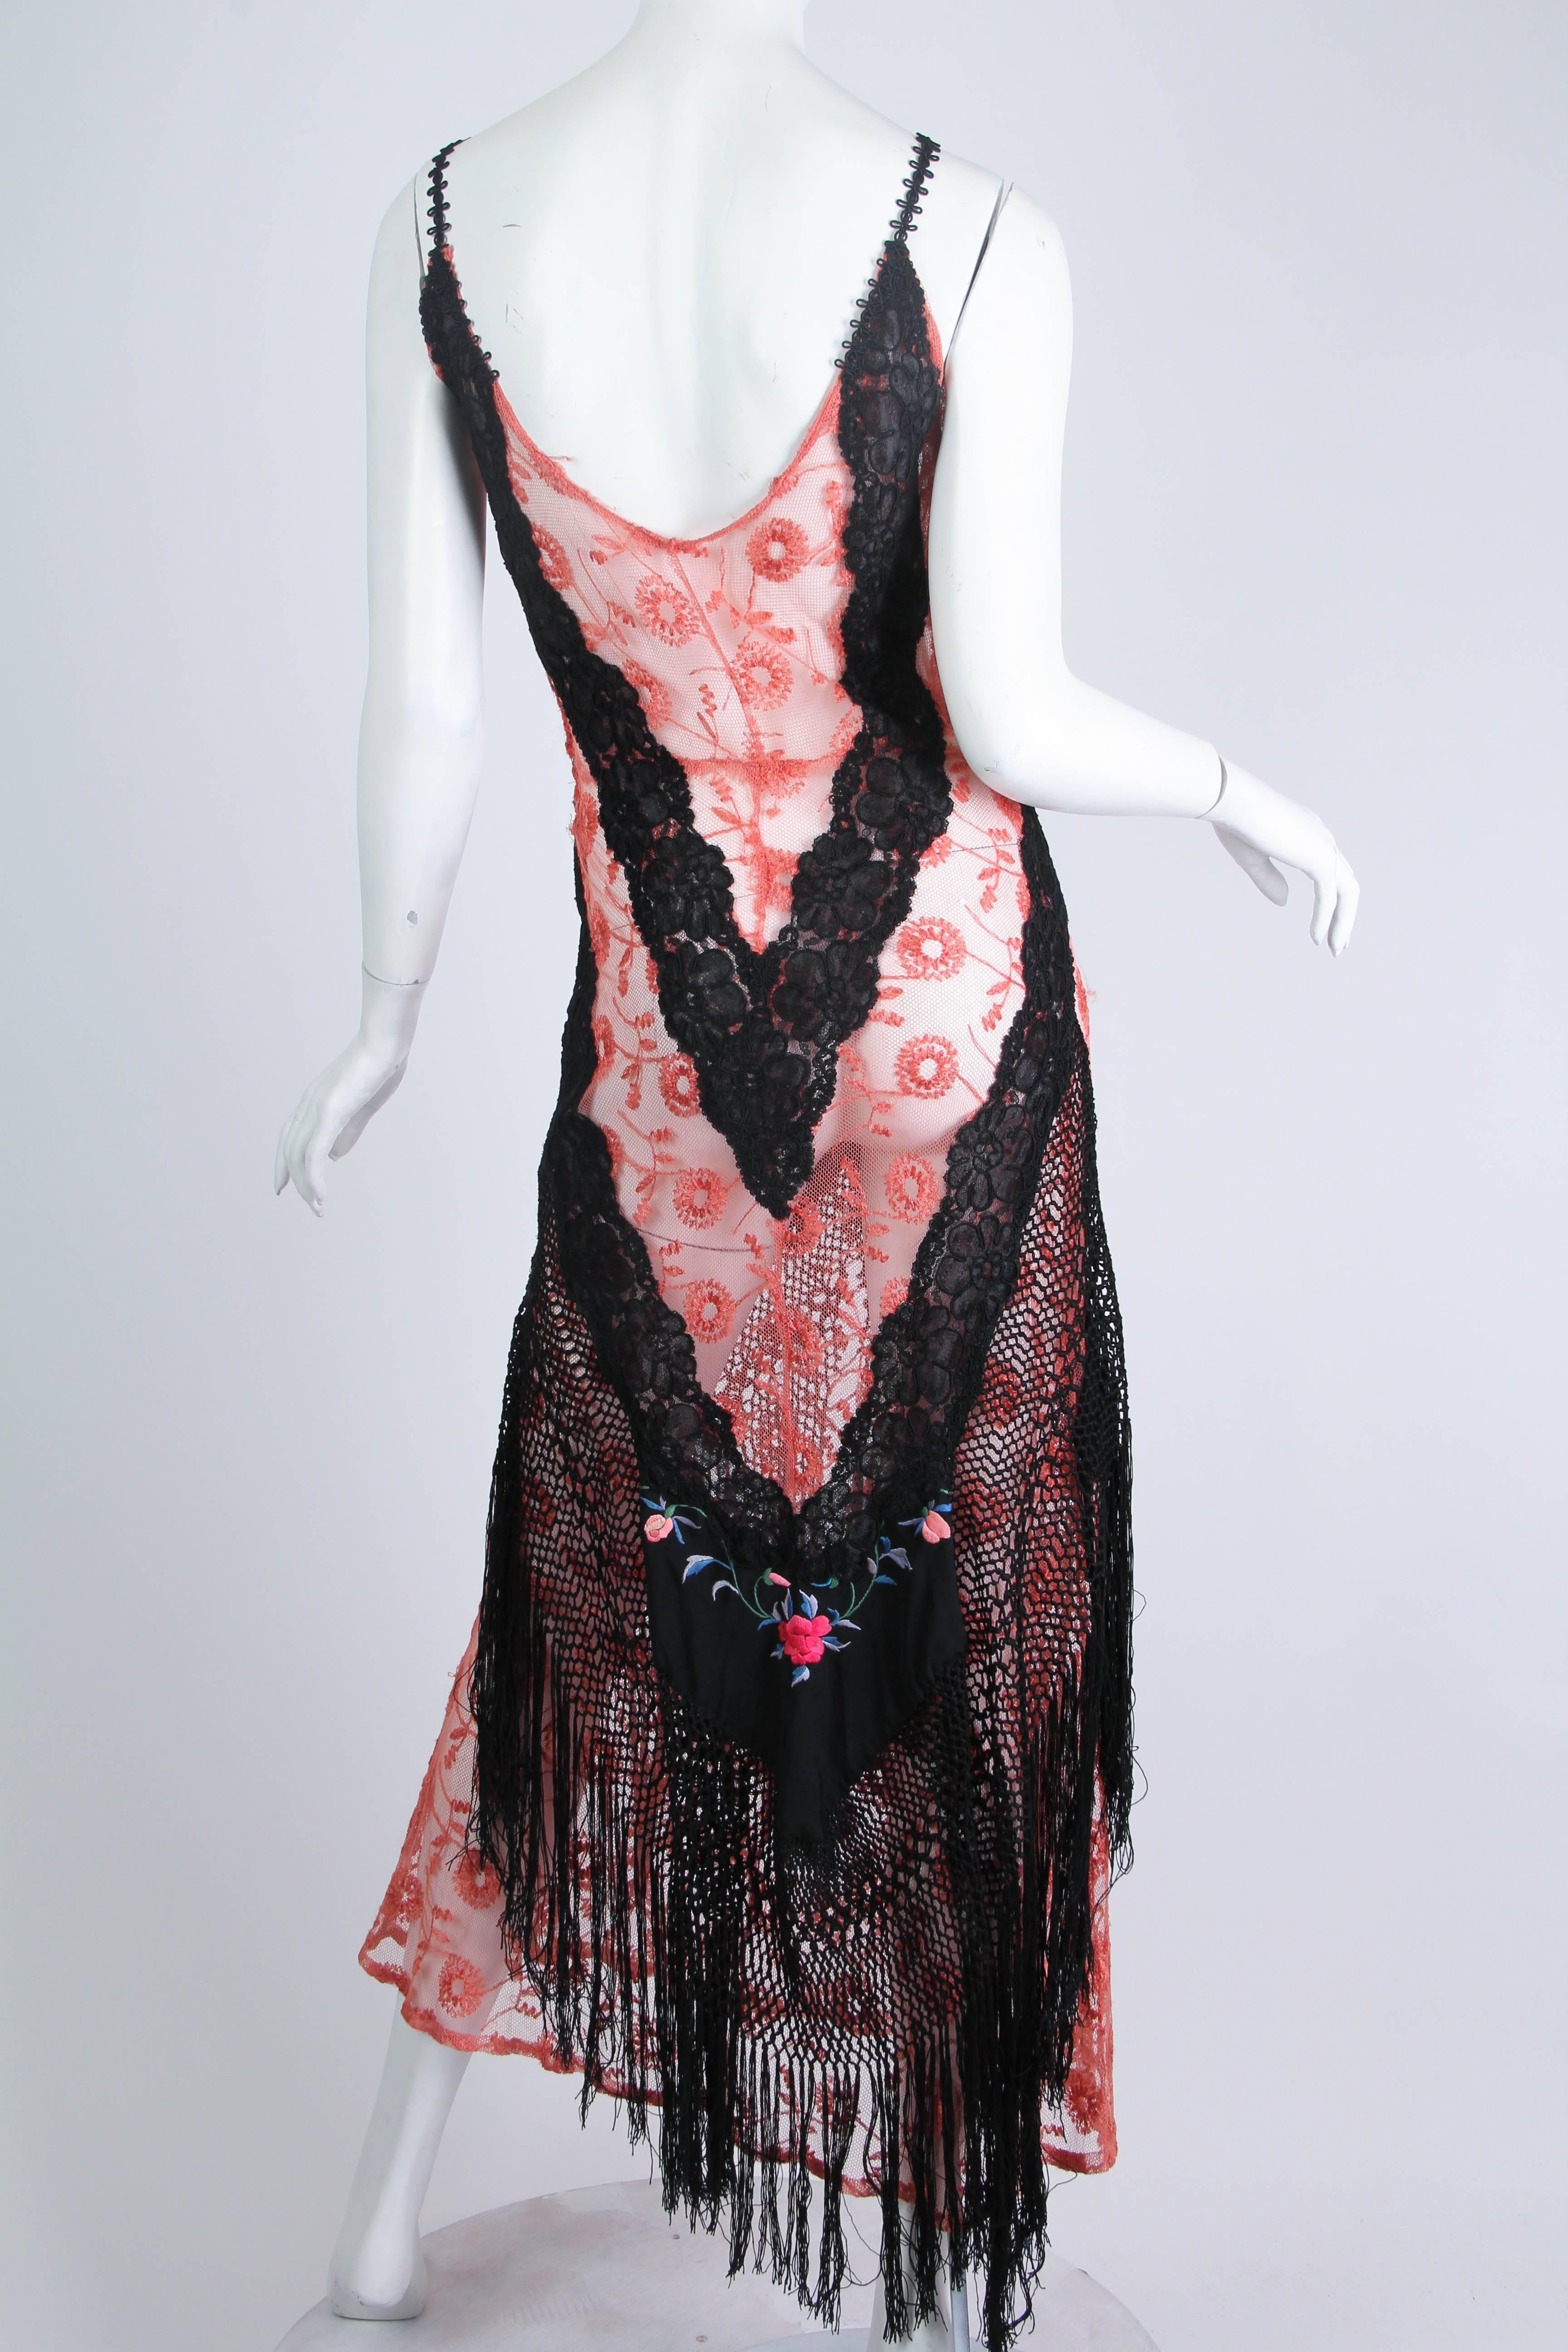 Women's 1930s Bias Cut Silk Net Lace Dress Re-Built with Chinese Embroidery and Fringe